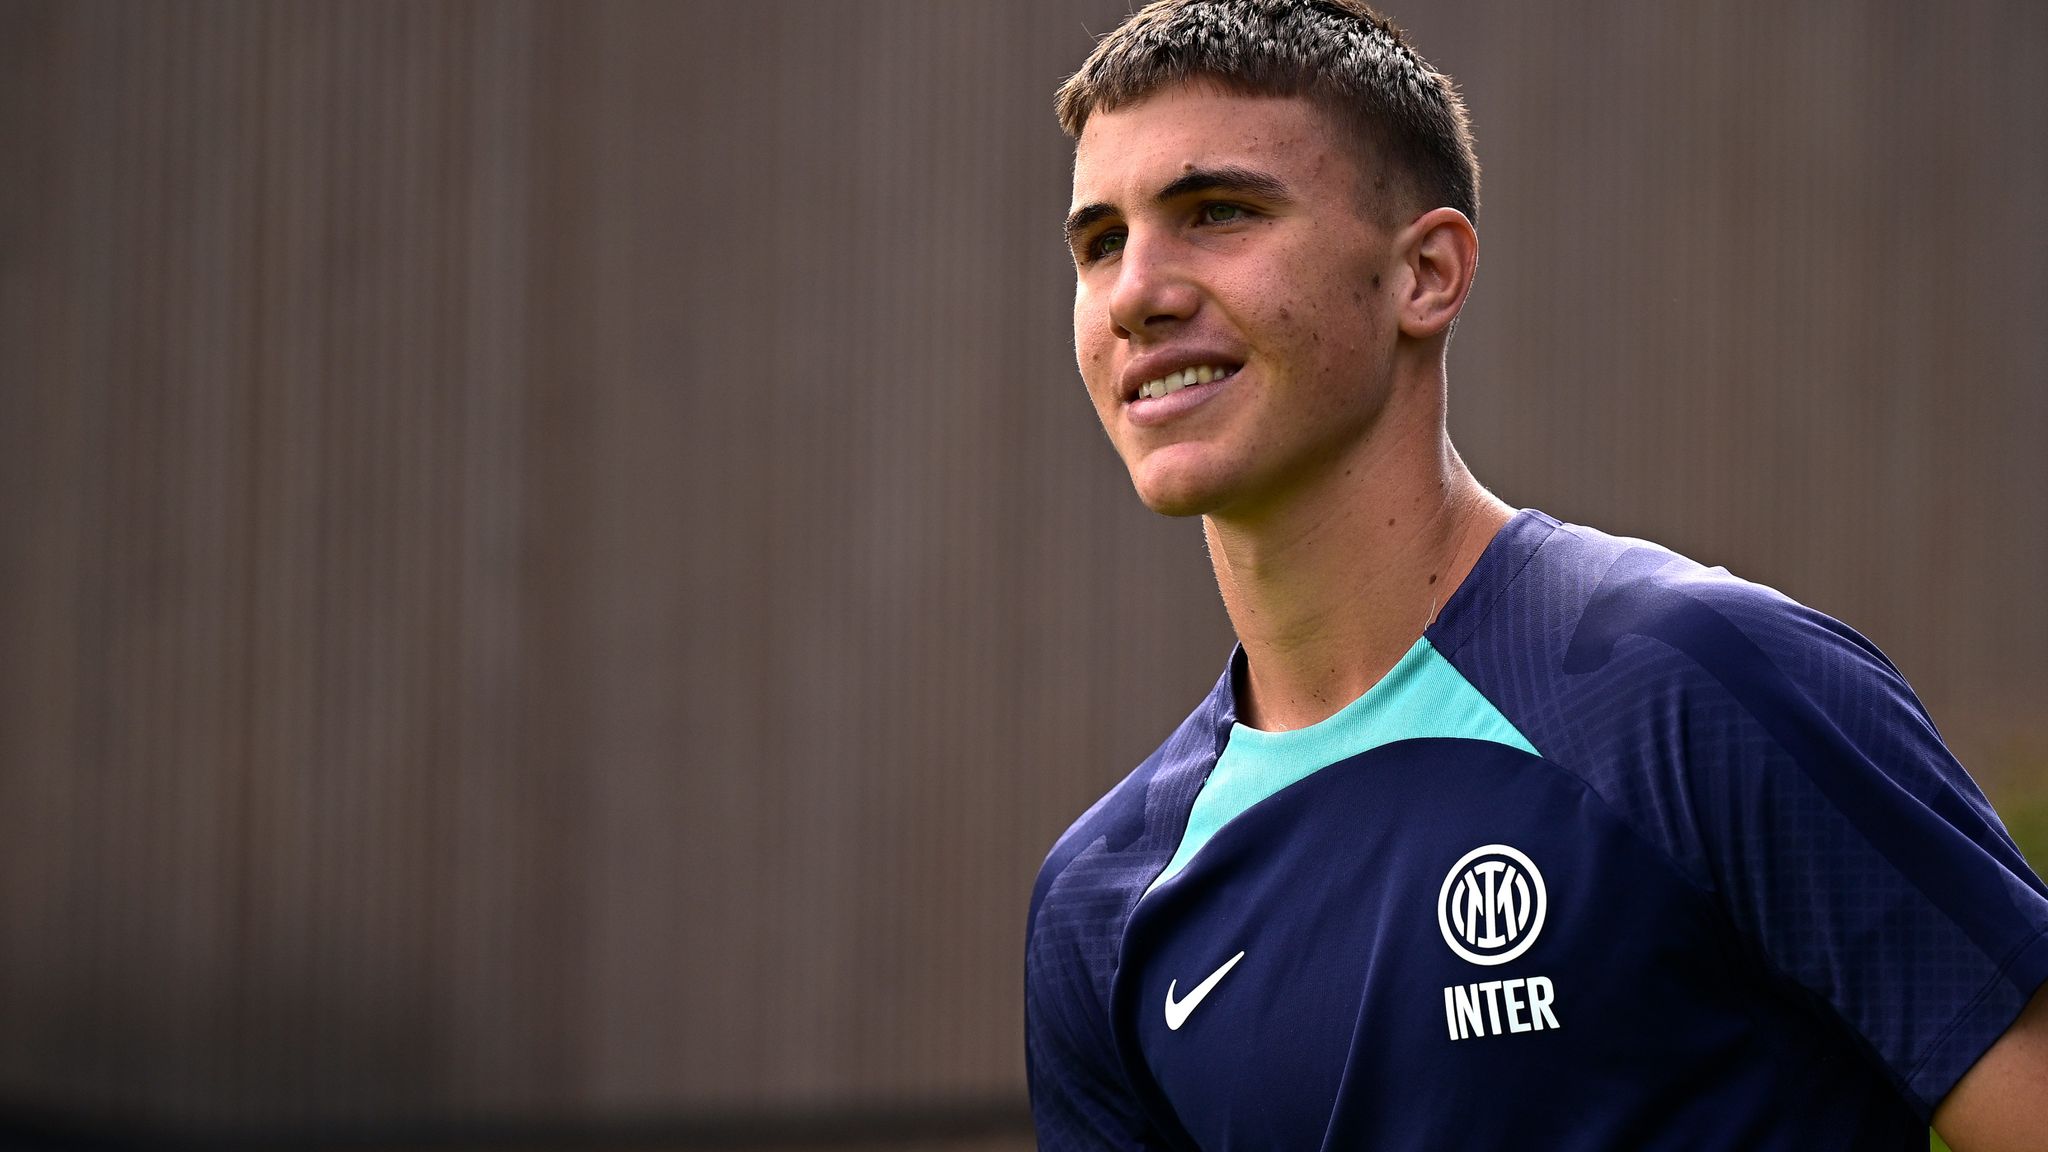 Chelsea sign Italy youth international Cesare Casadei from Inter